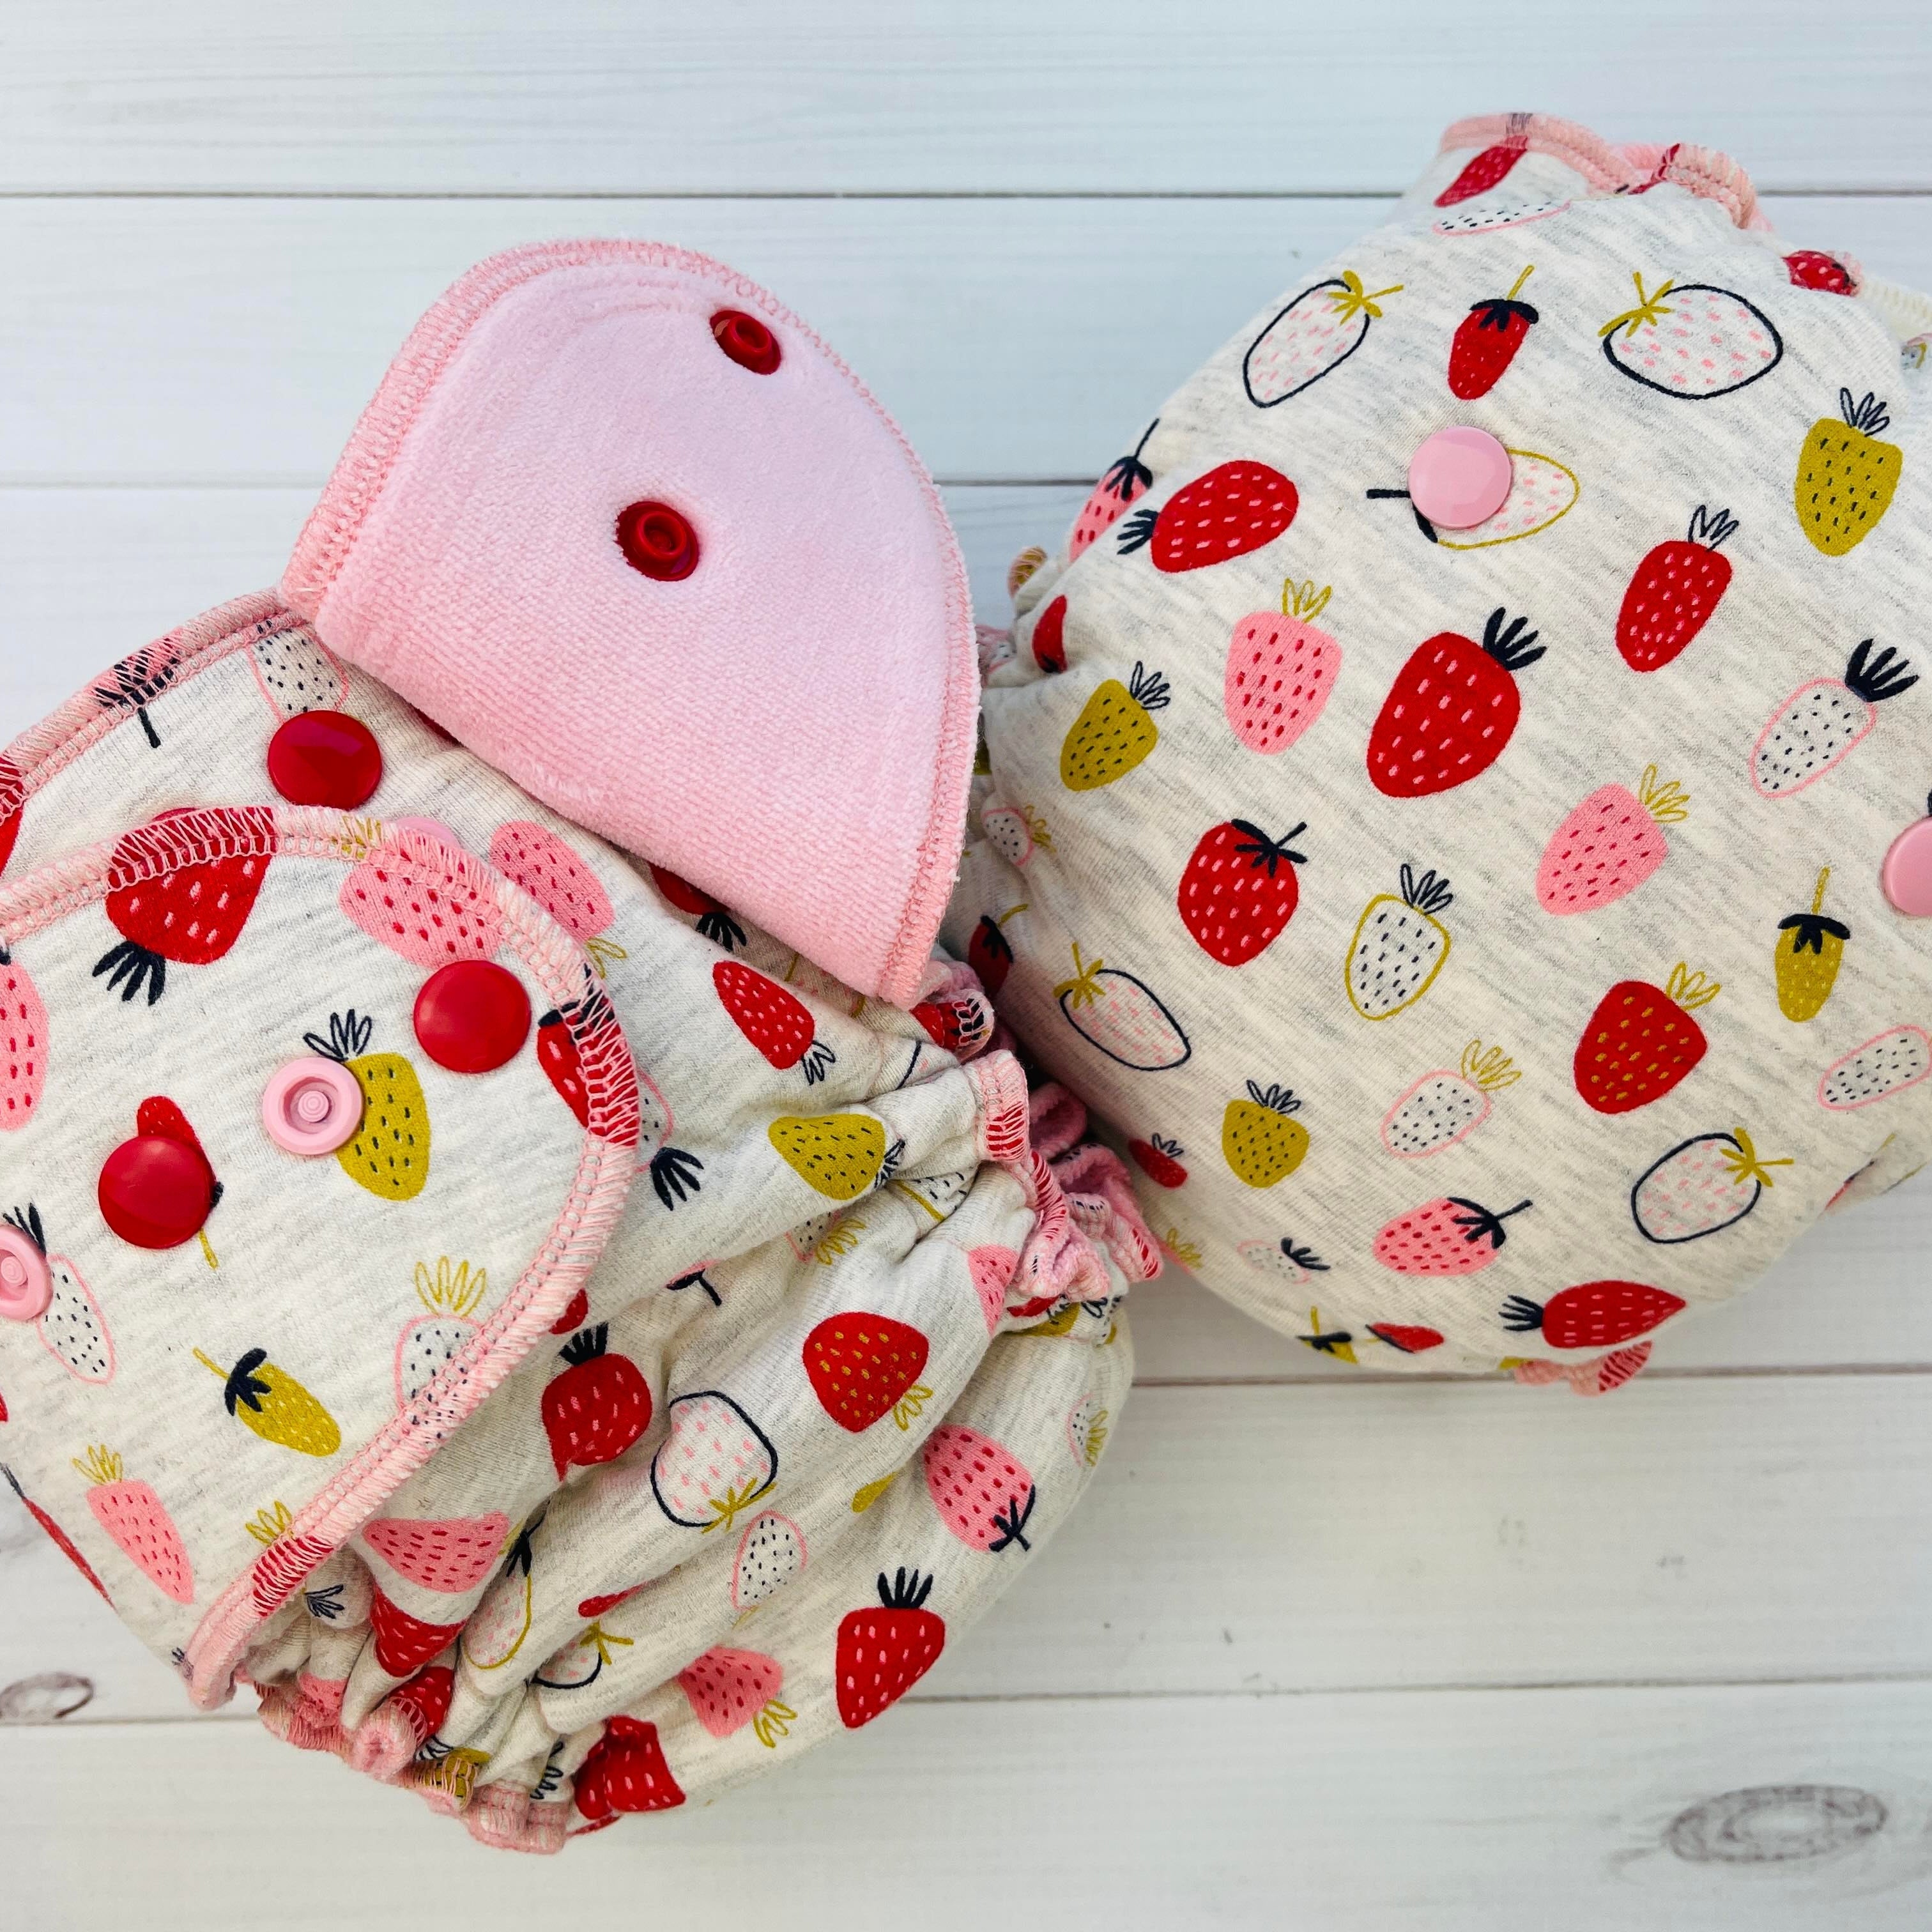 Lilly & Frank cloth diaper Yummy Strawberries Toddler Cloth Diaper - Fitted - Serged